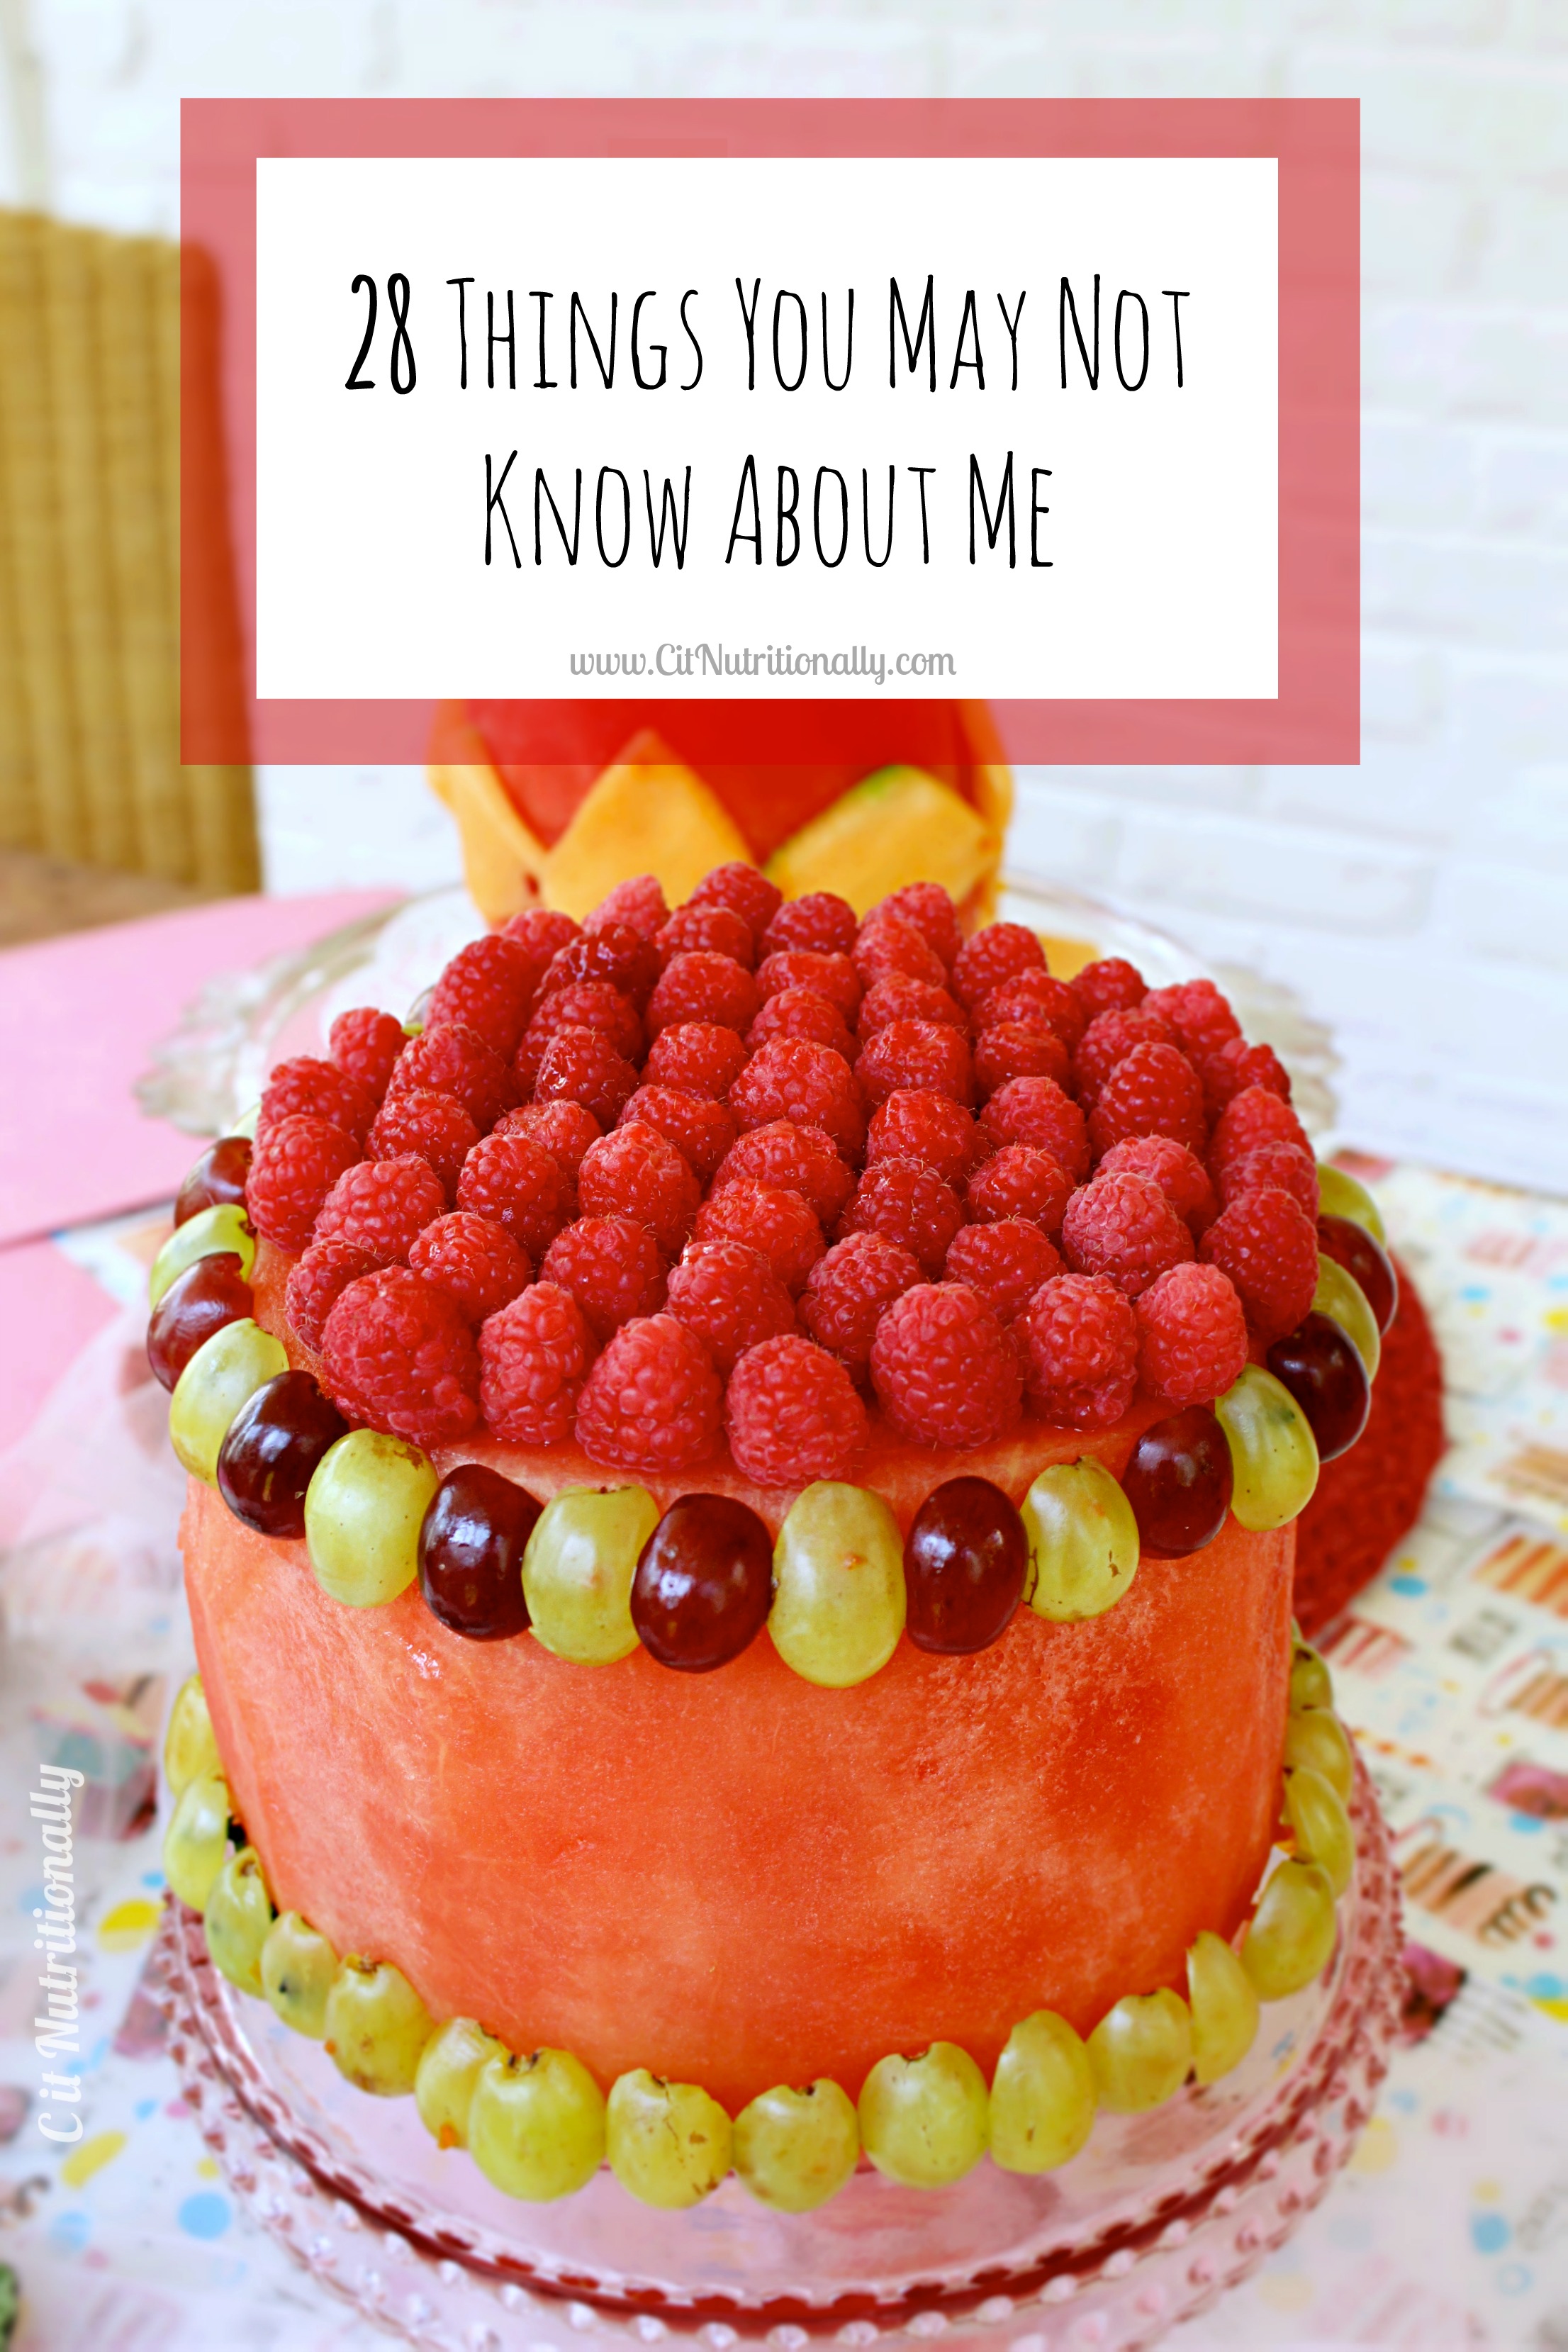 28 Things You May Not Know About Me On My 28th Birthday! | C it Nutritionally